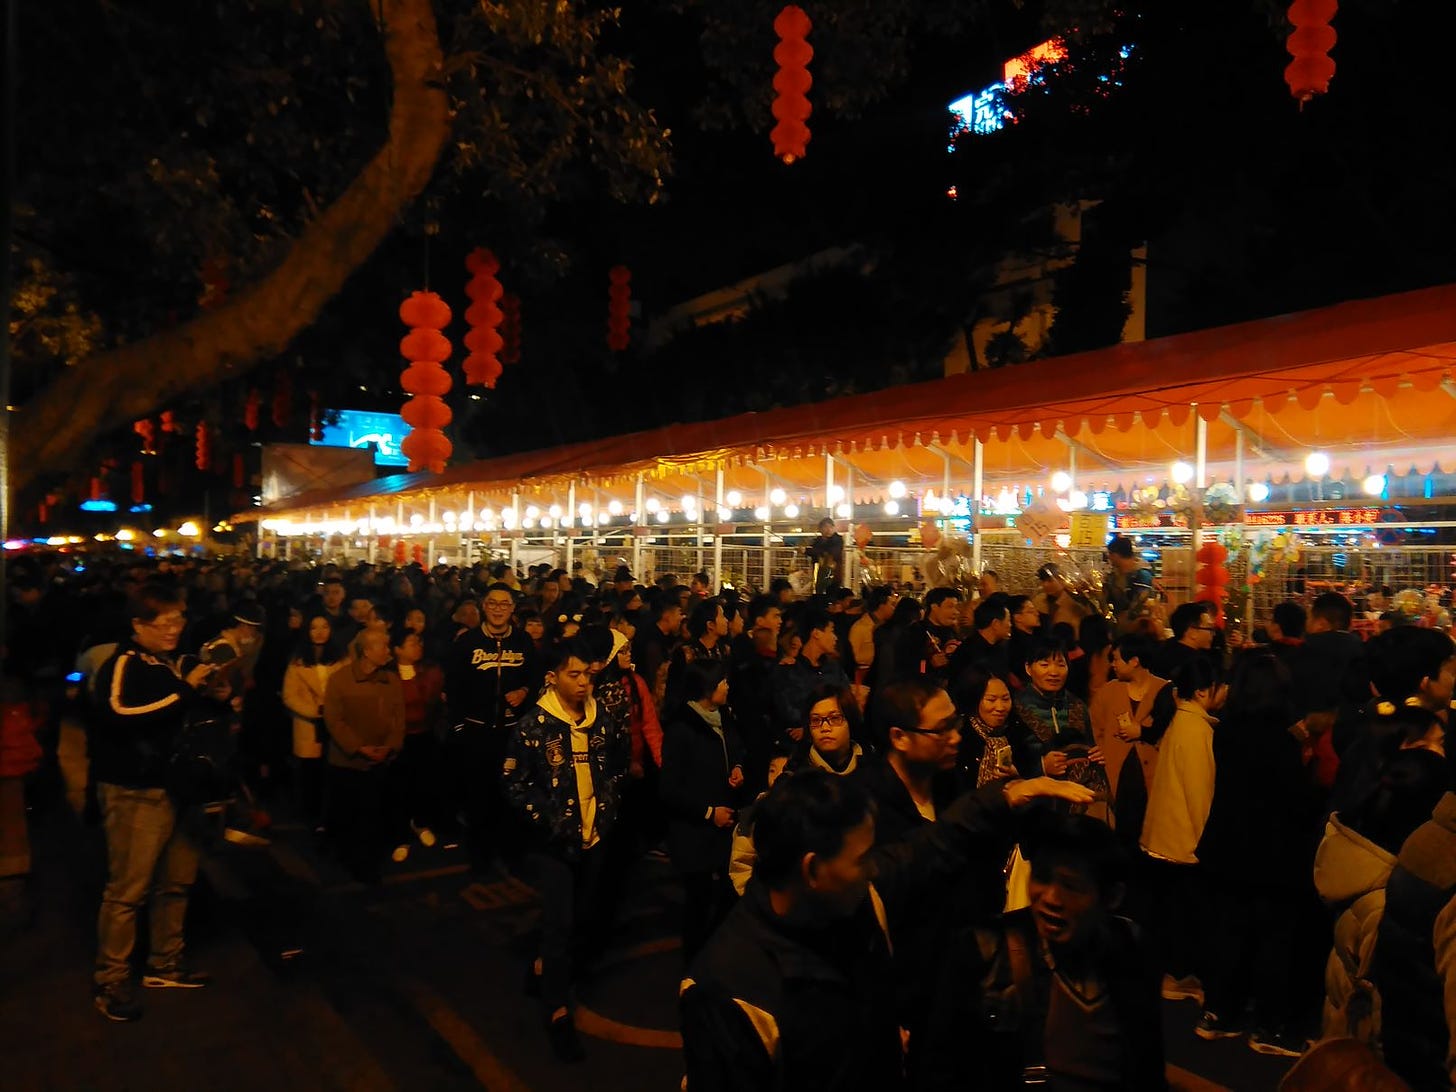 A very crowded night market in Guangzhou, lit by hanging Chinese red lanterns and electric lighting strung across the market stalls